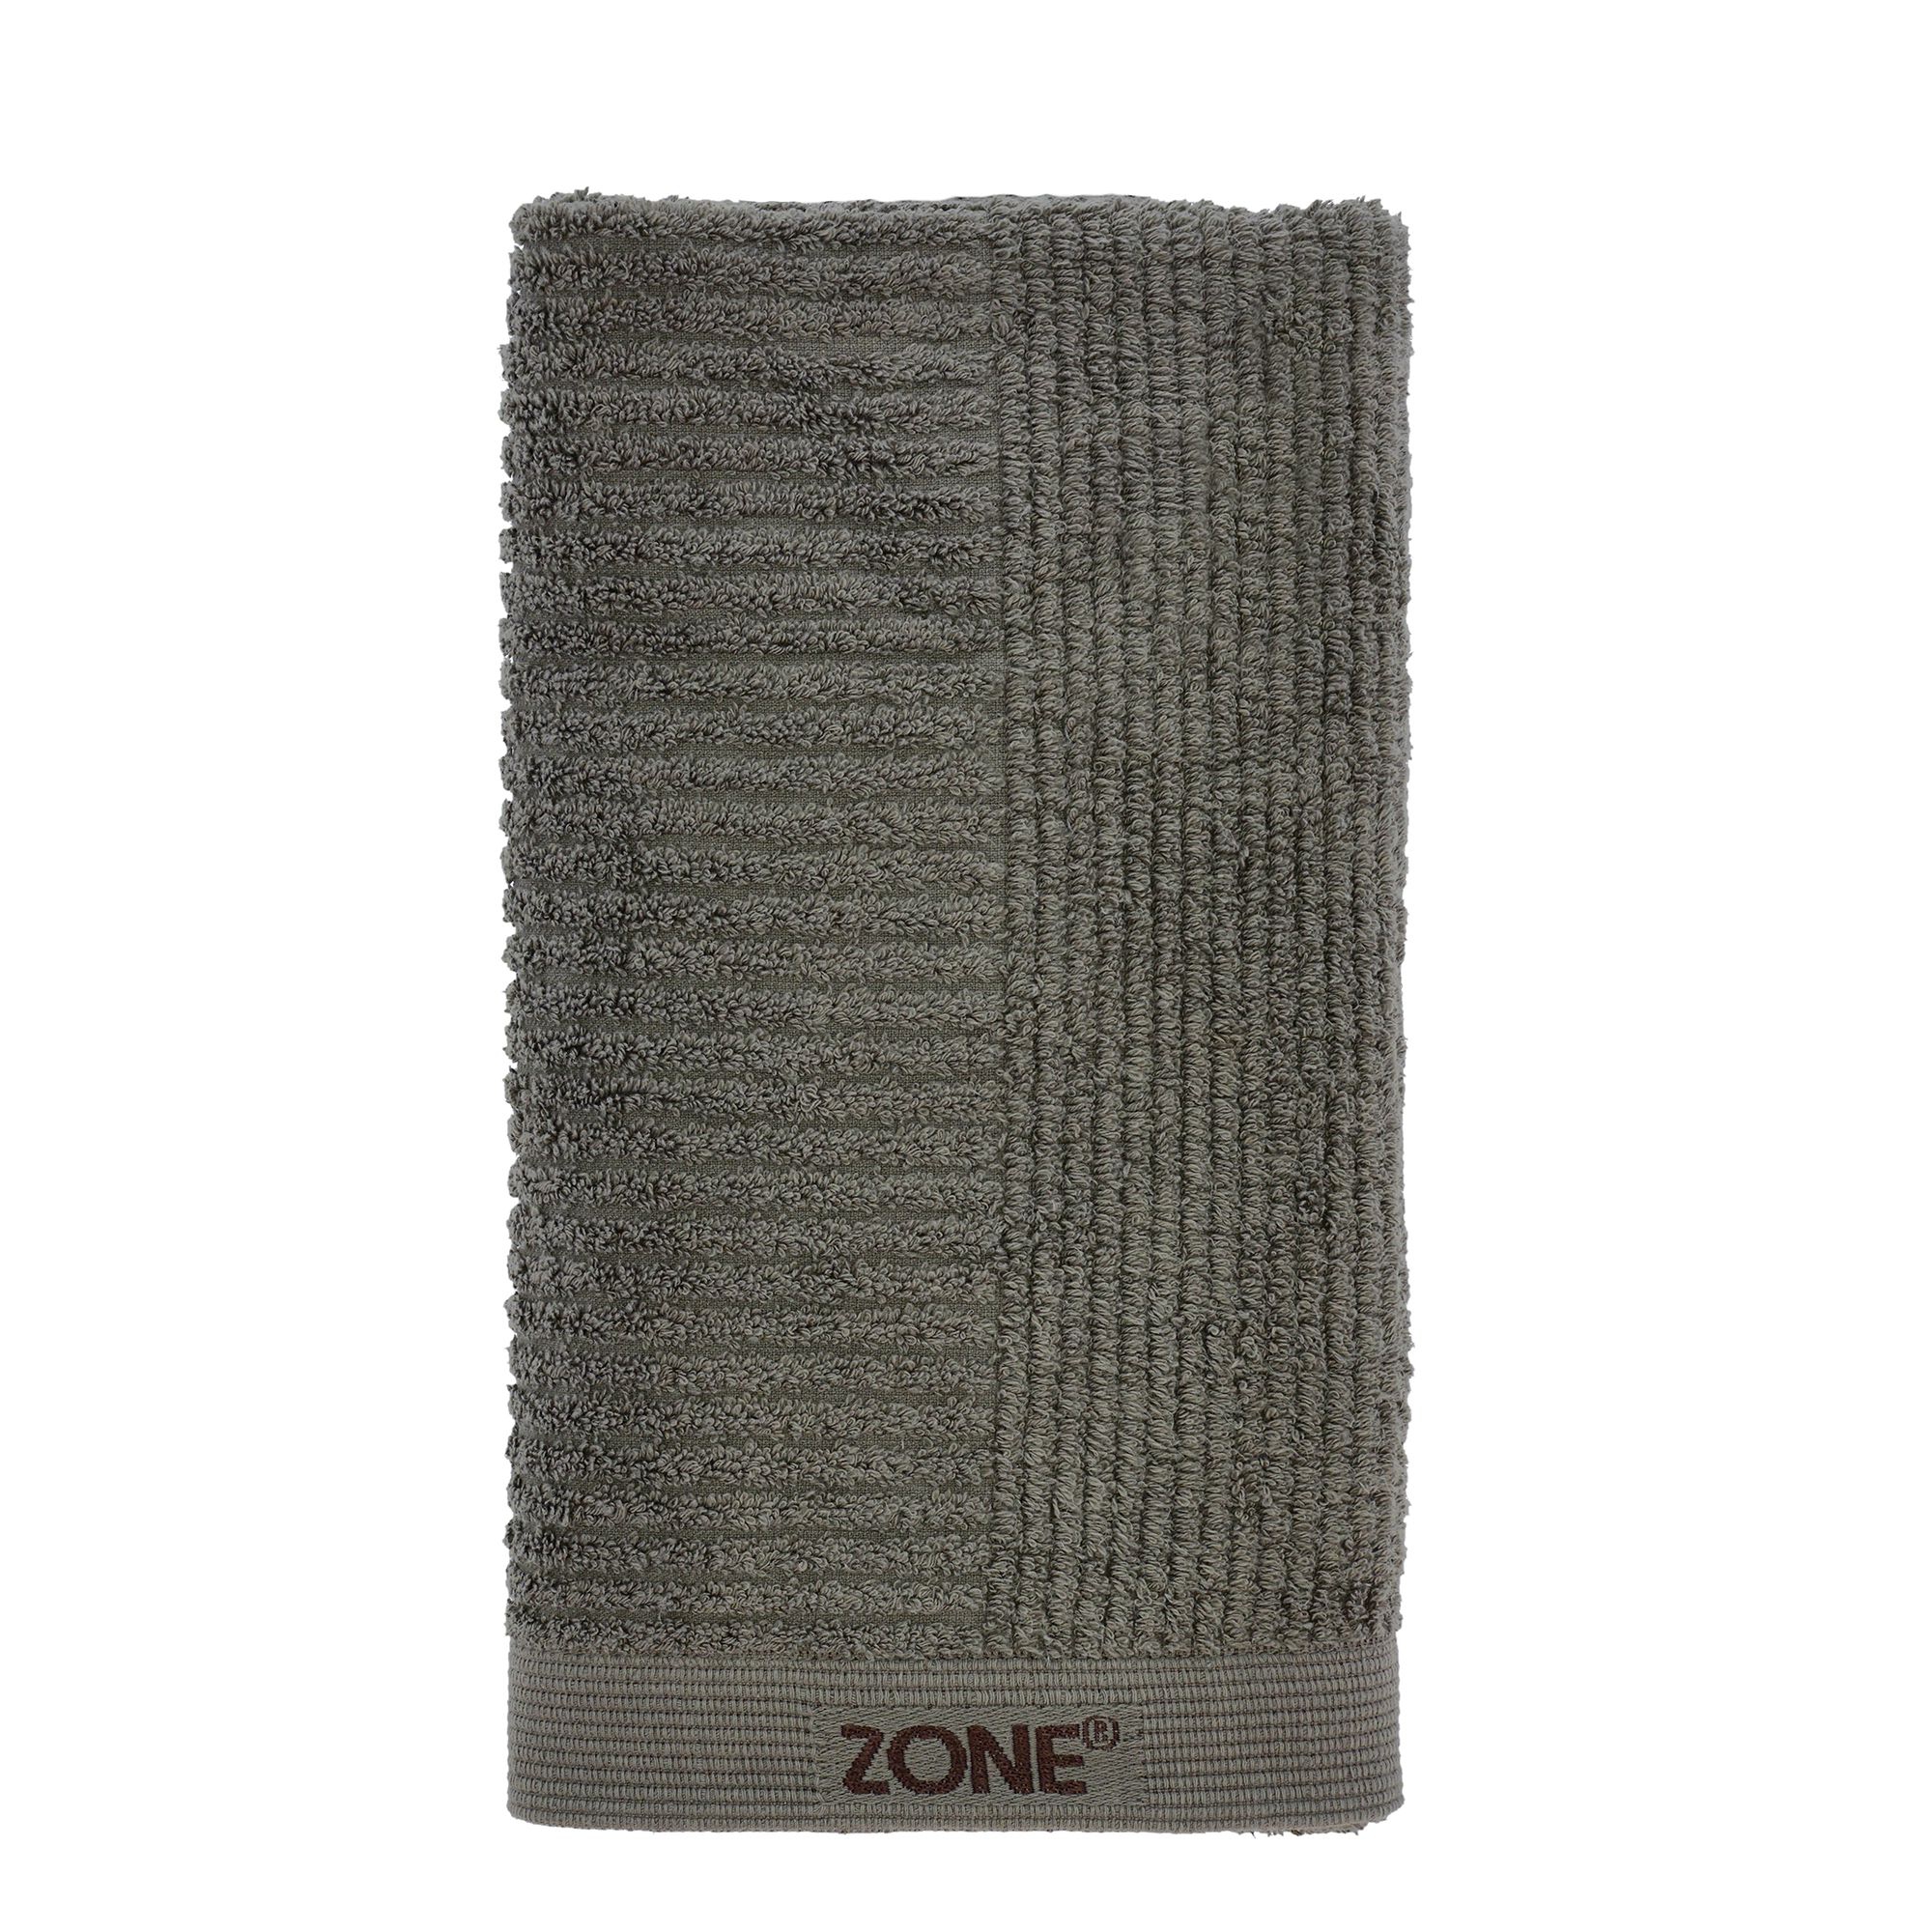 Zone - Classic Handtuch - 50 x 100 cm - Olive Green